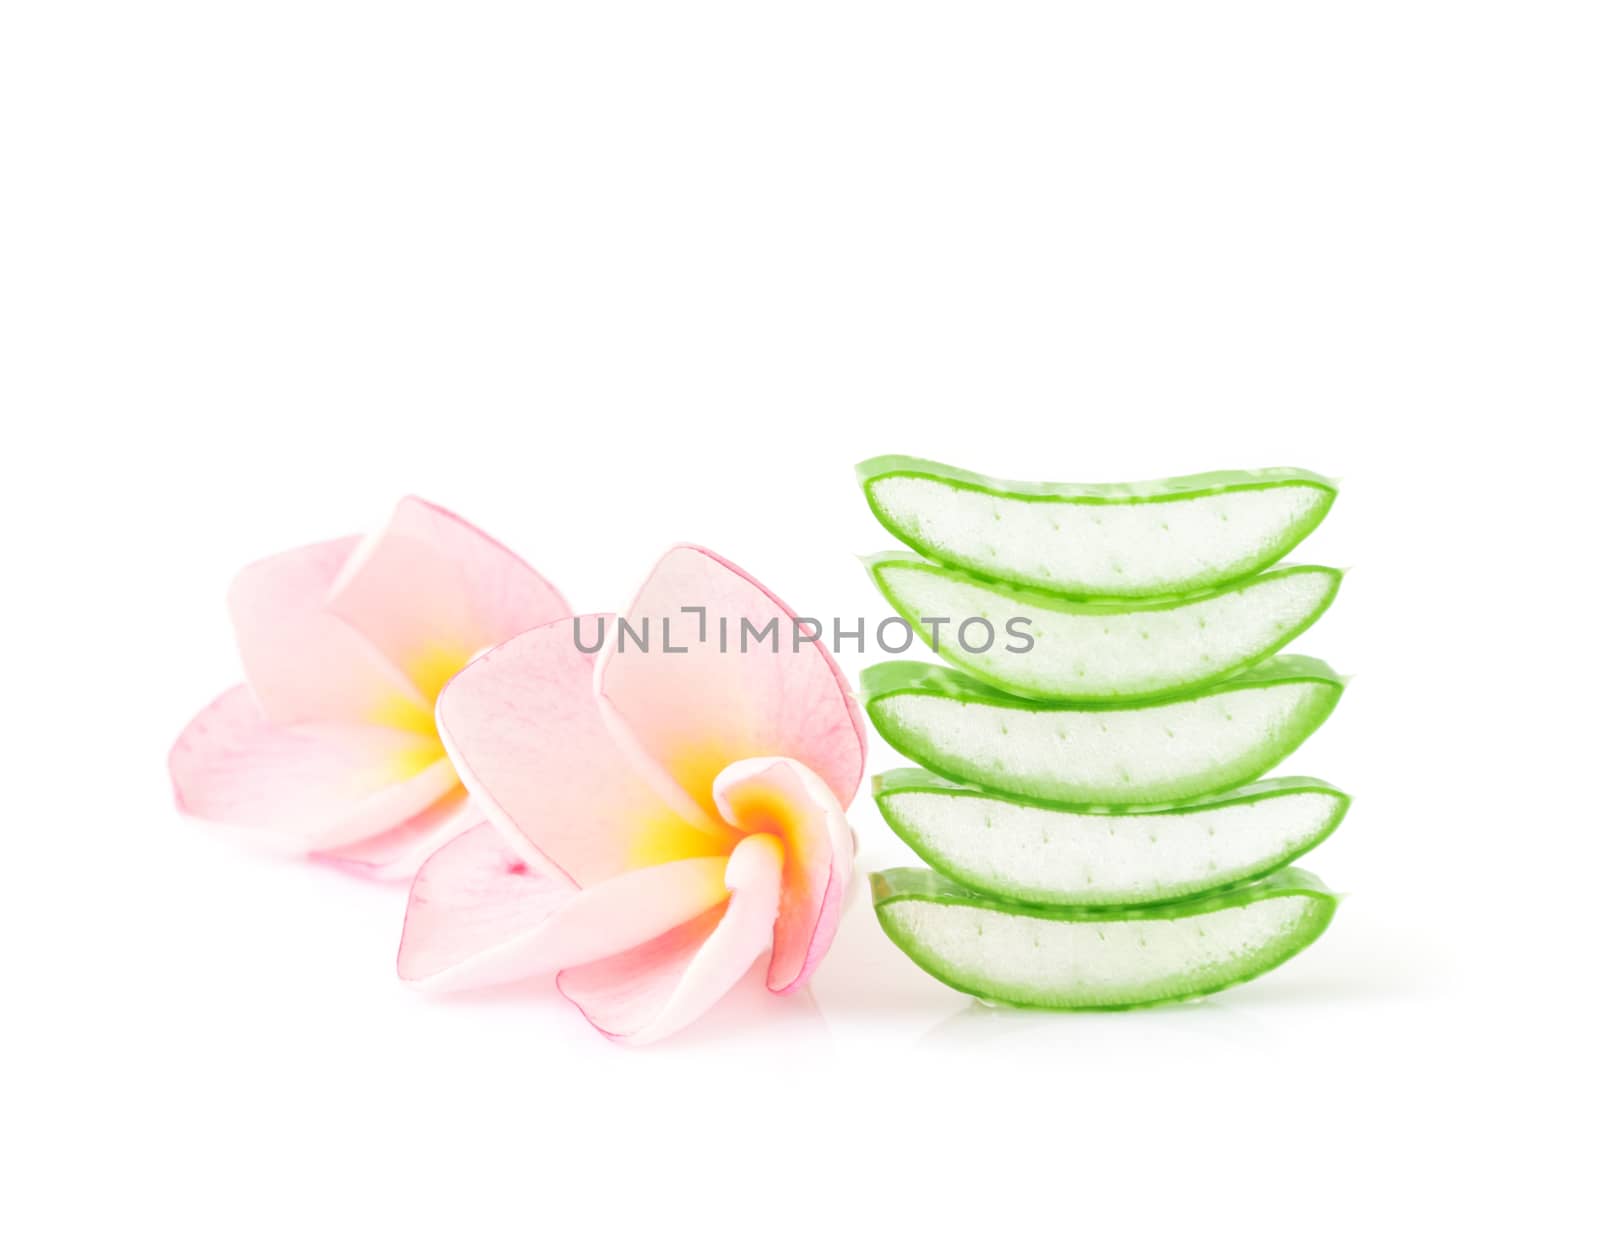 Closeup fresh aloe vera slice with plumeria on white background, beauty and healthy care concept